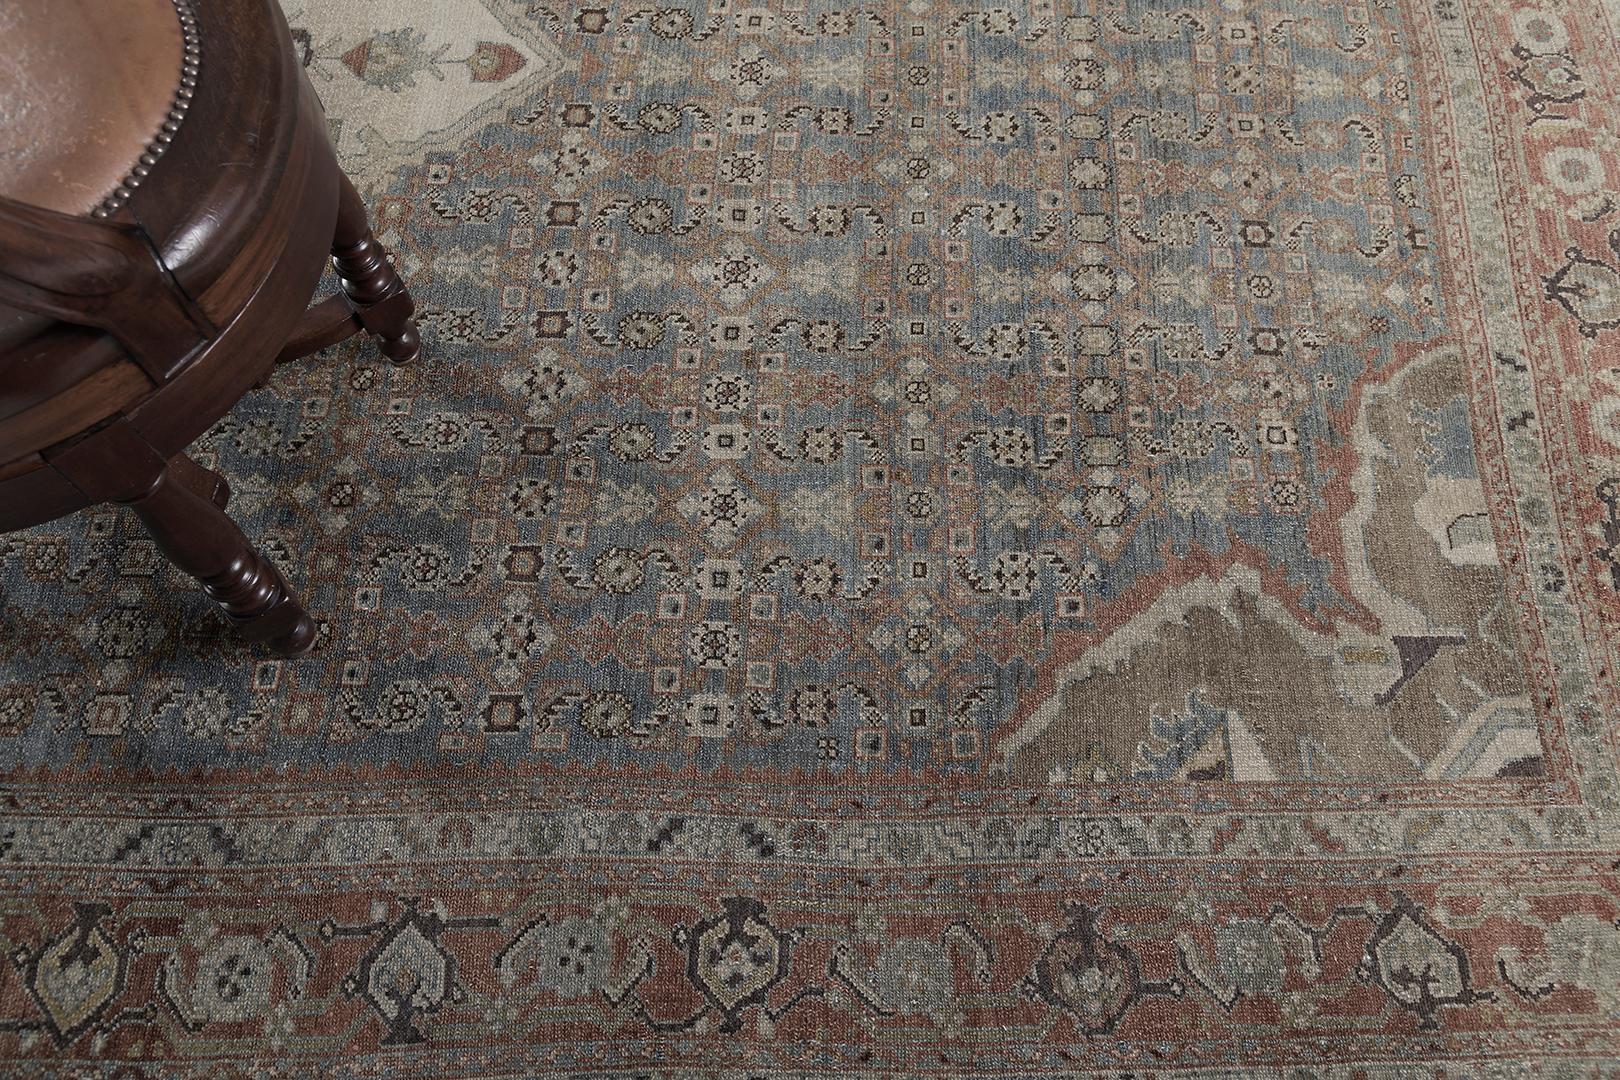 A mesmerizing Antique Persian Malayer rug that is stunningly woven in aan allover botanical motifs in the soothing muted tones of aegean blue and cinnamon. This breathtaking rug is adorned with various botanicals that formed together creating a